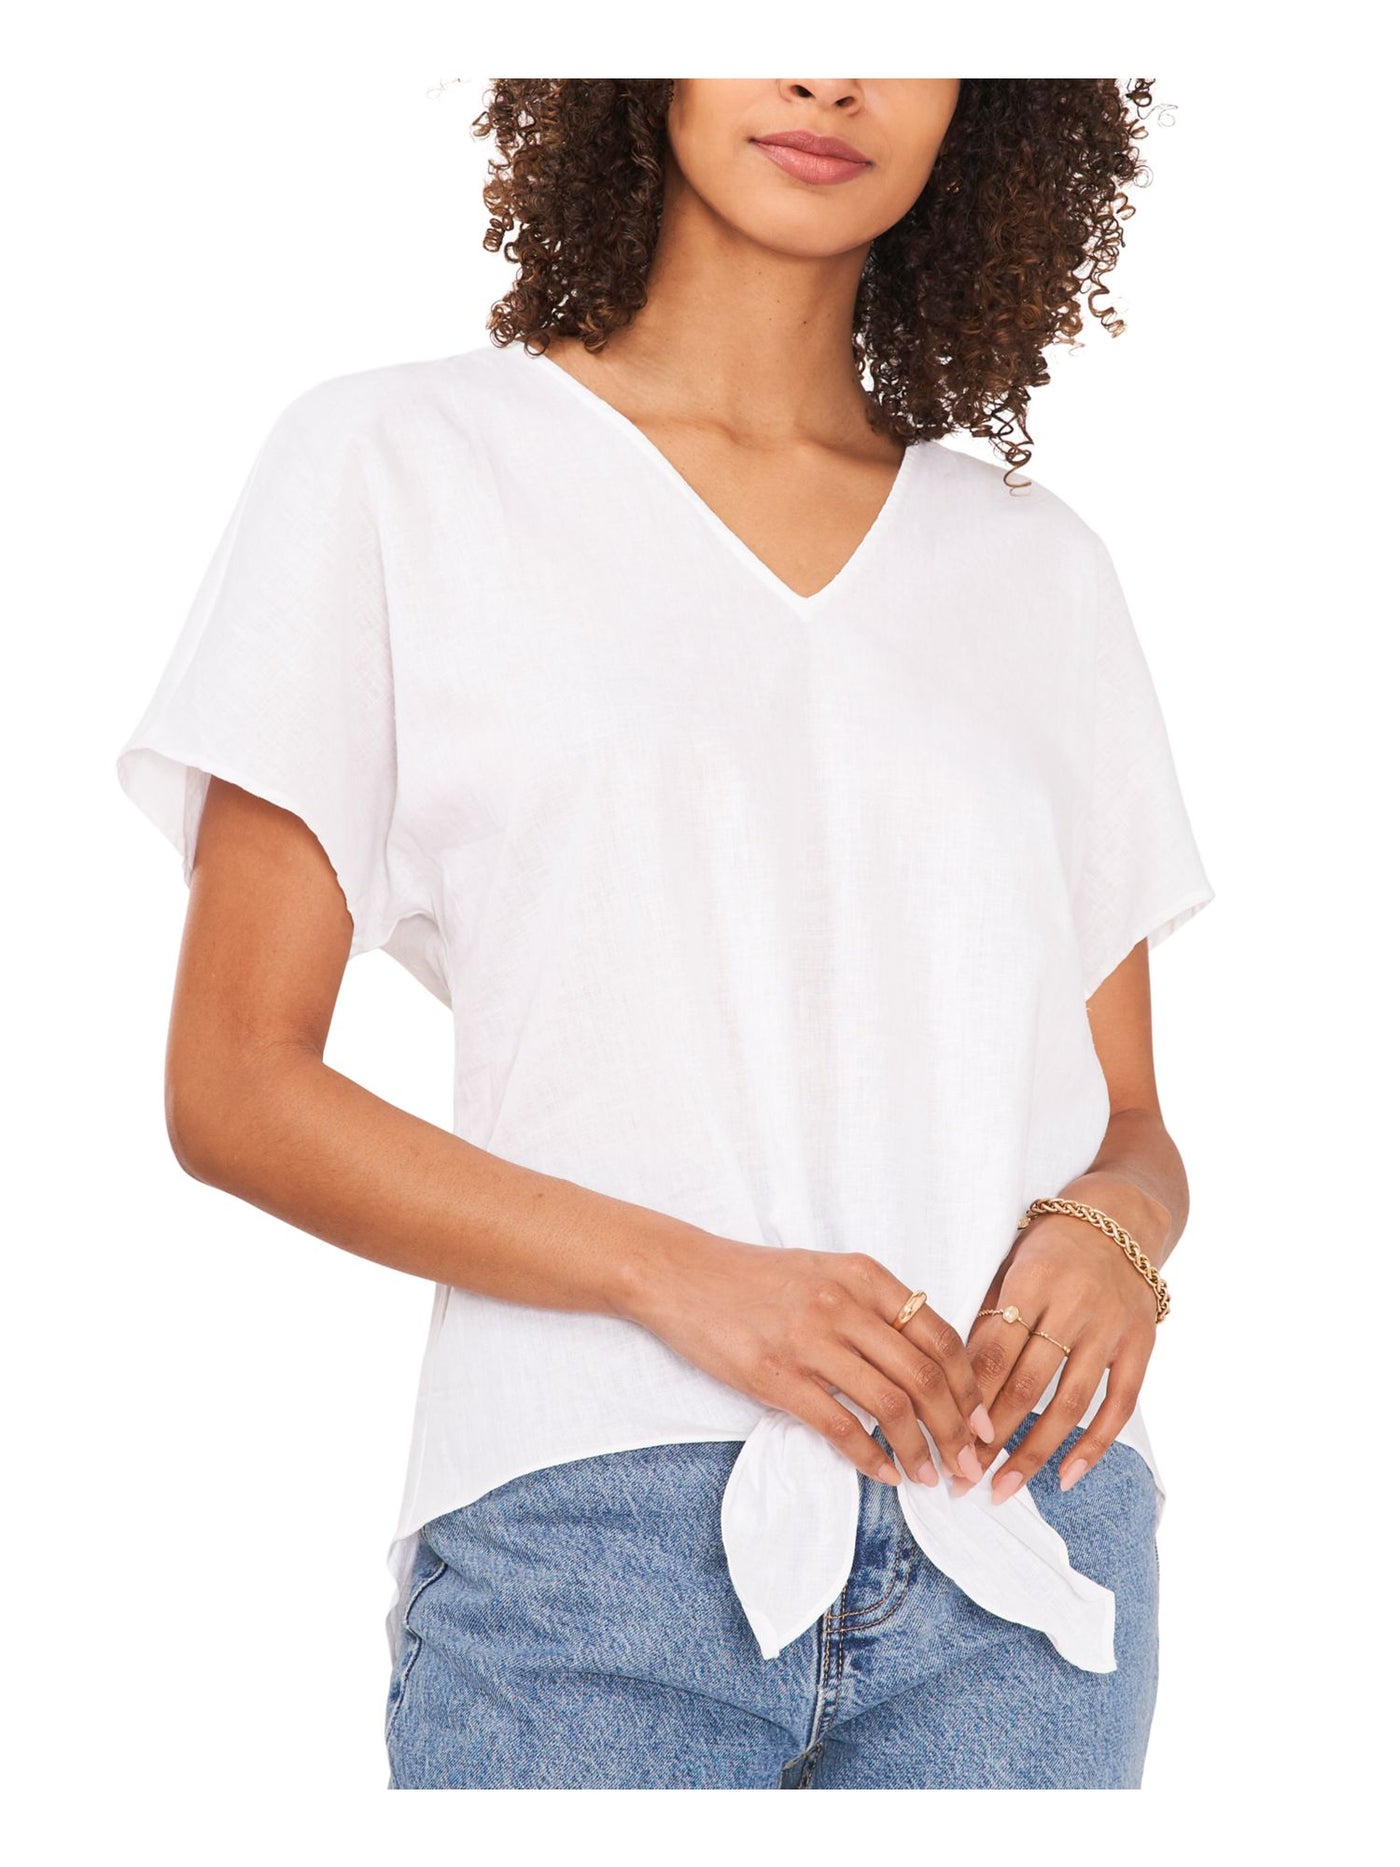 VINCE CAMUTO Womens White Short Sleeve V Neck Top XS